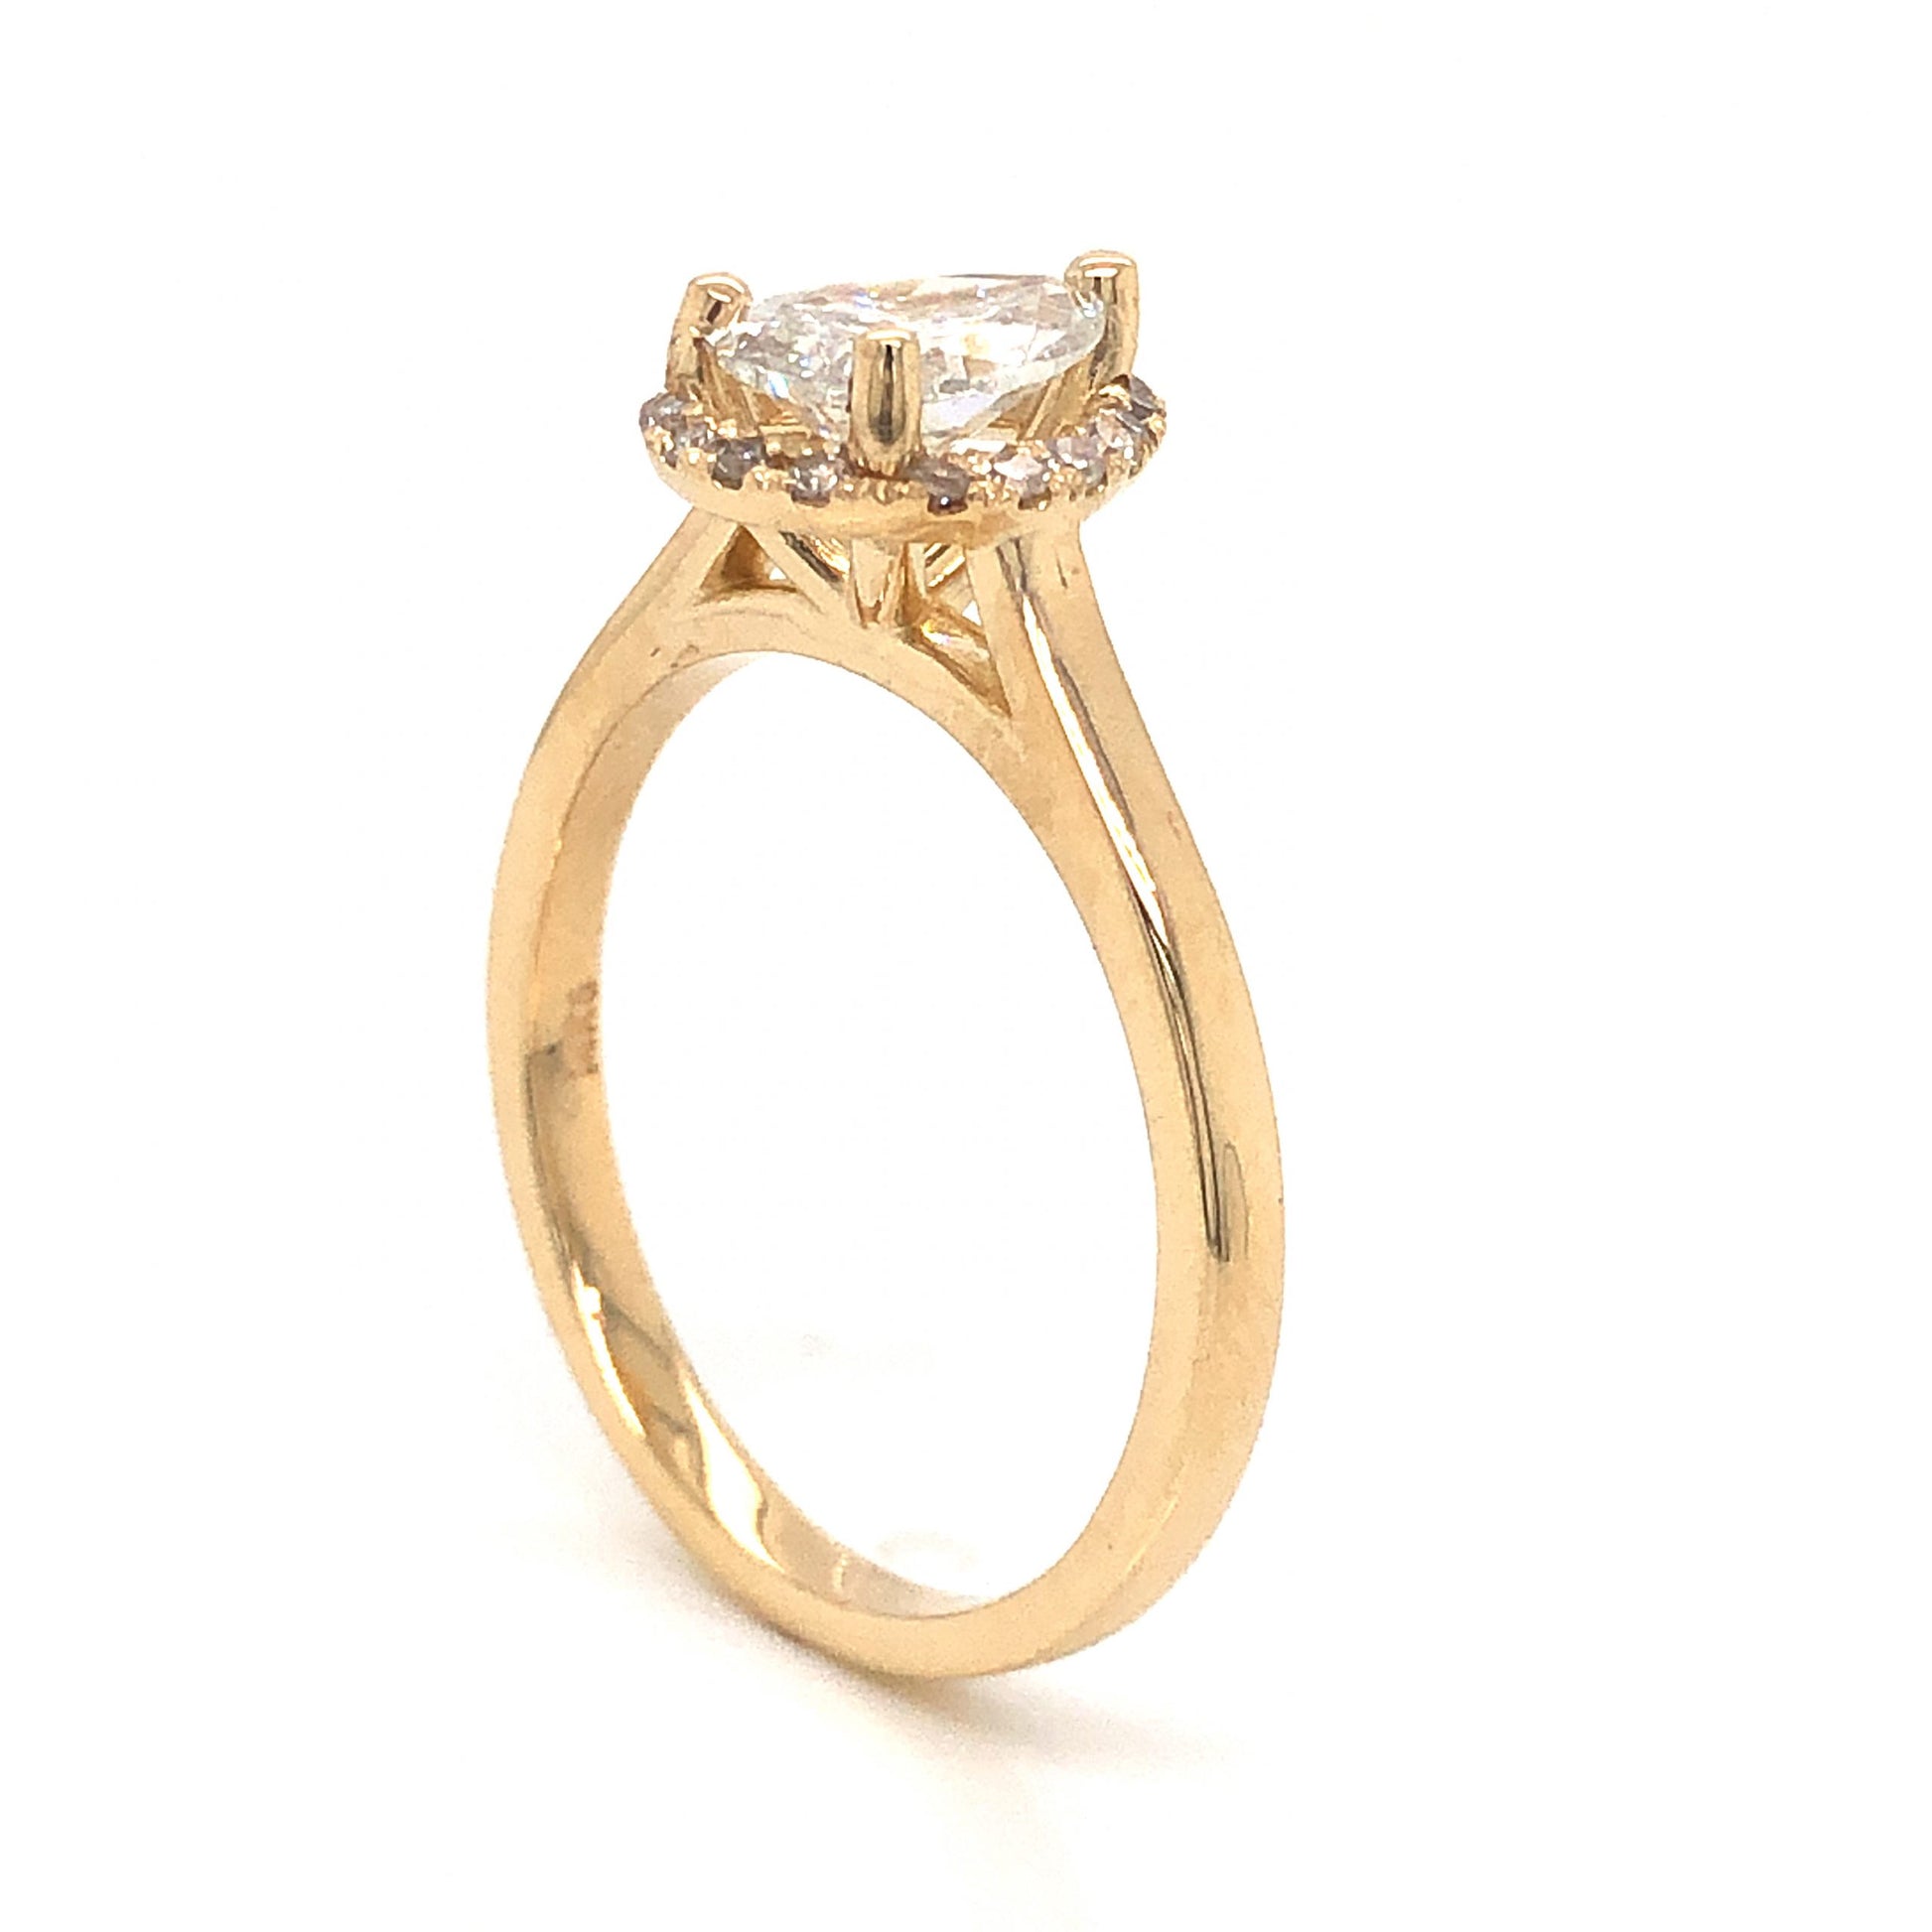 Pear Cut Diamond Halo Engagement Ring in 14k Yellow GoldComposition: 14 Karat Yellow Gold Ring Size: 7 Total Diamond Weight: .99ct Total Gram Weight: 3.2 g Inscription: 14k 
      